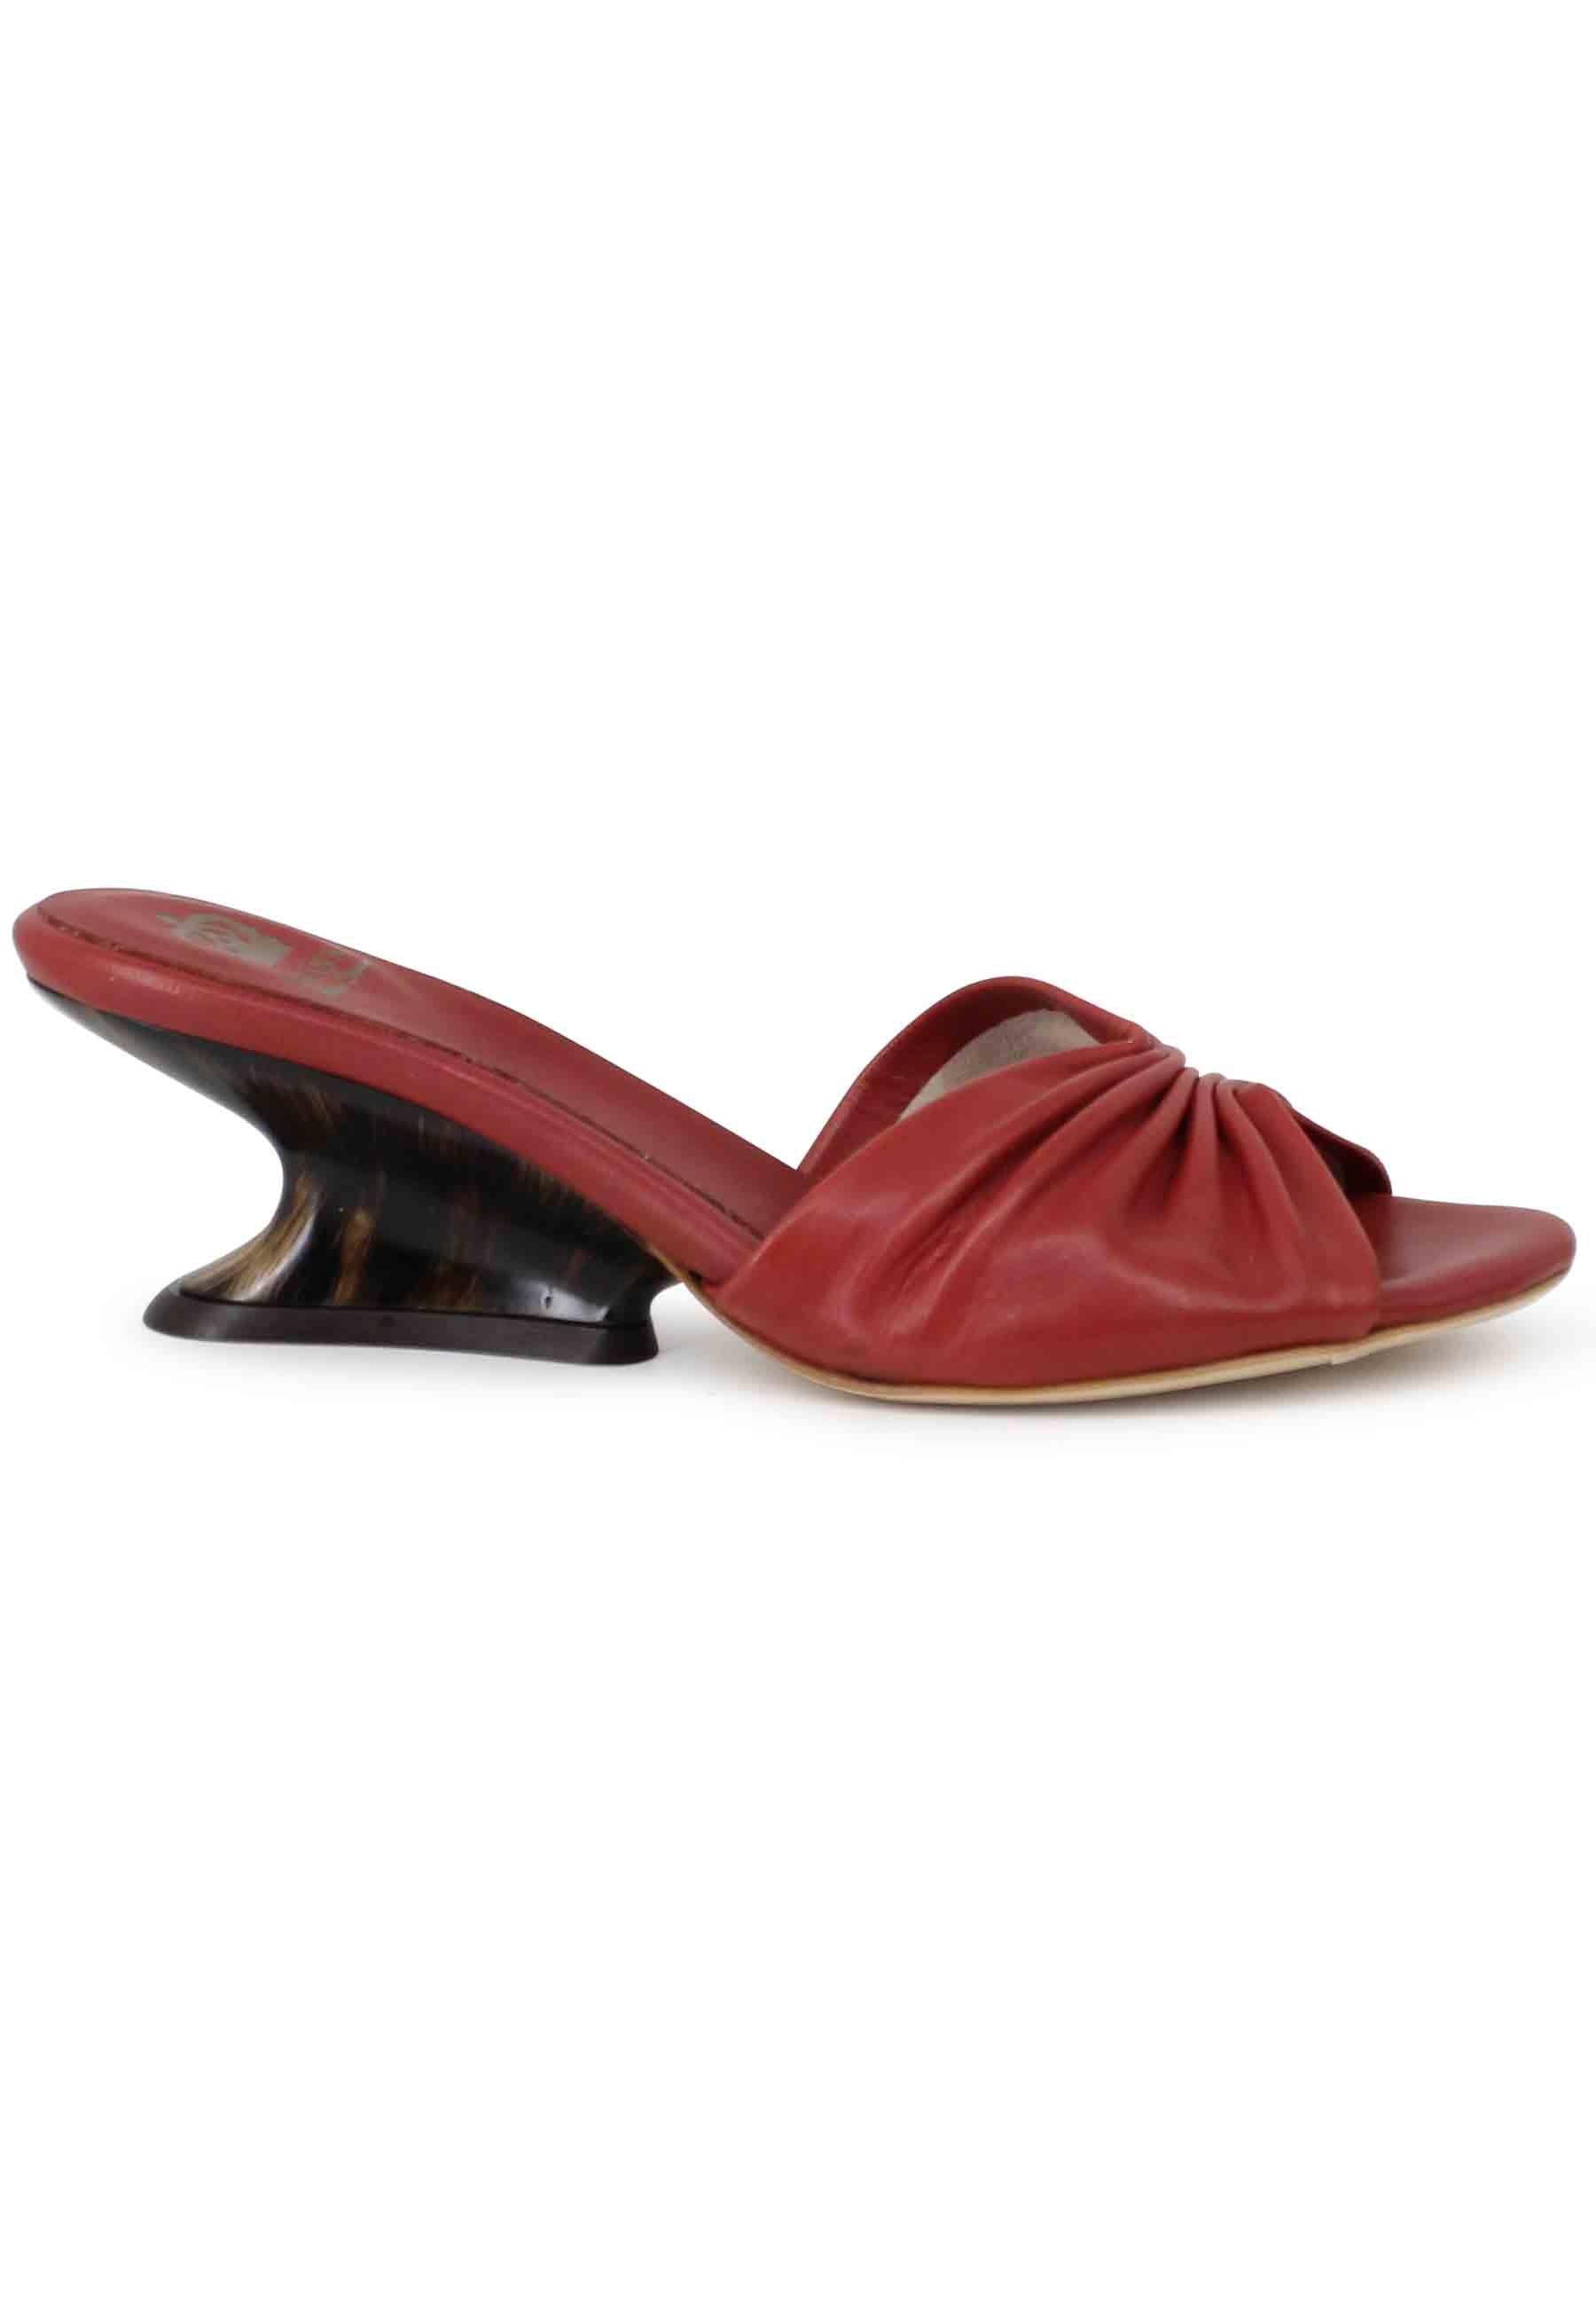 Women's sandals in brick leather with low wedge